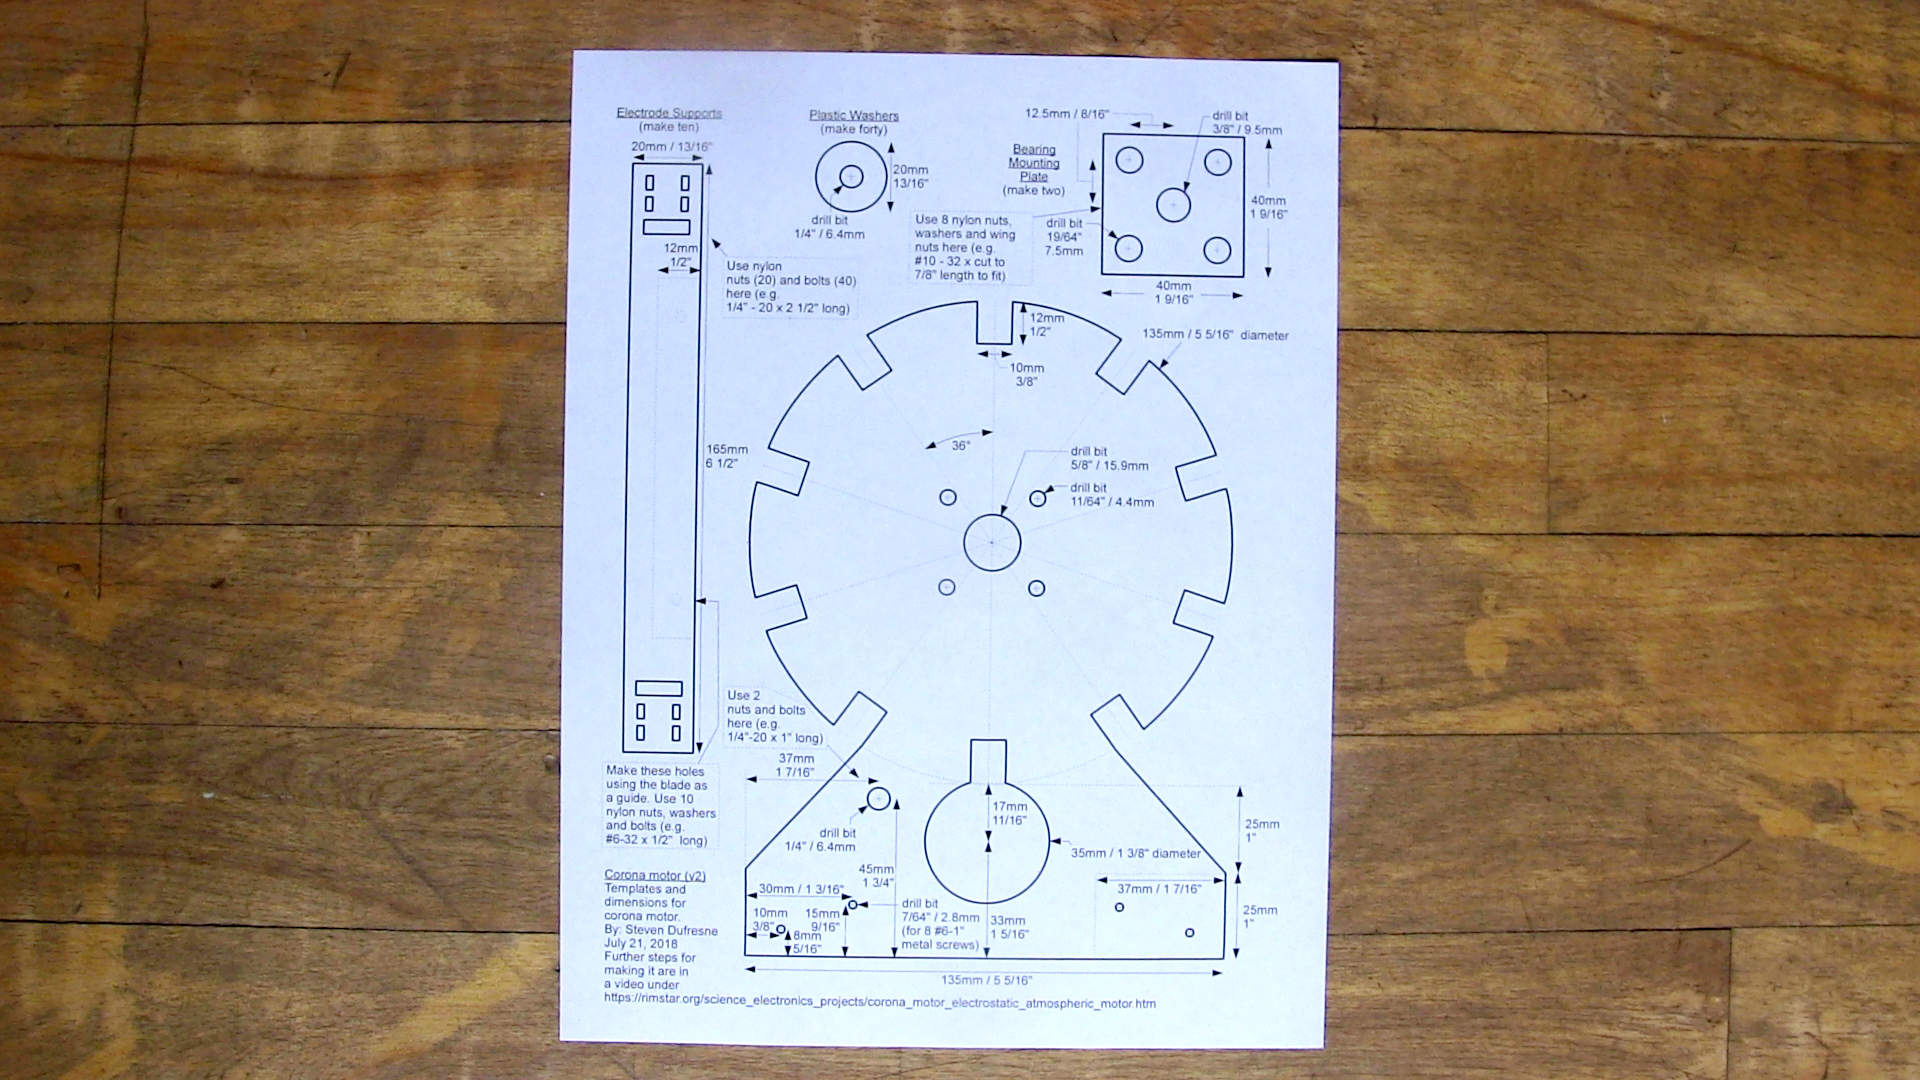 The corona motor template sheet of paper before cutting it out.